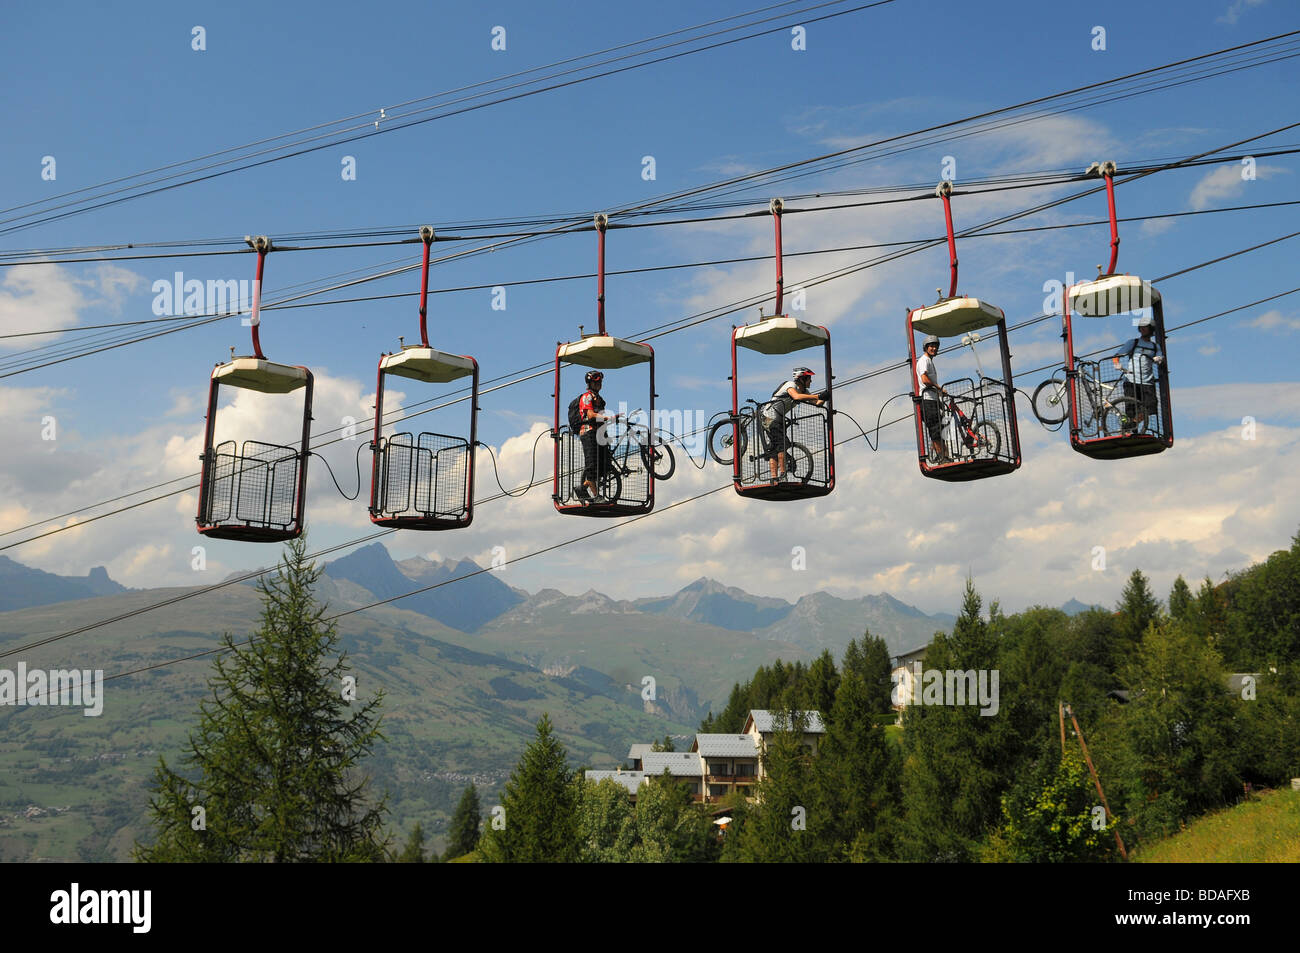 A Group Of Mountain Bikers Use An Unusual Ski Lift In Les Arcs In intended for How To Use Ski Lift